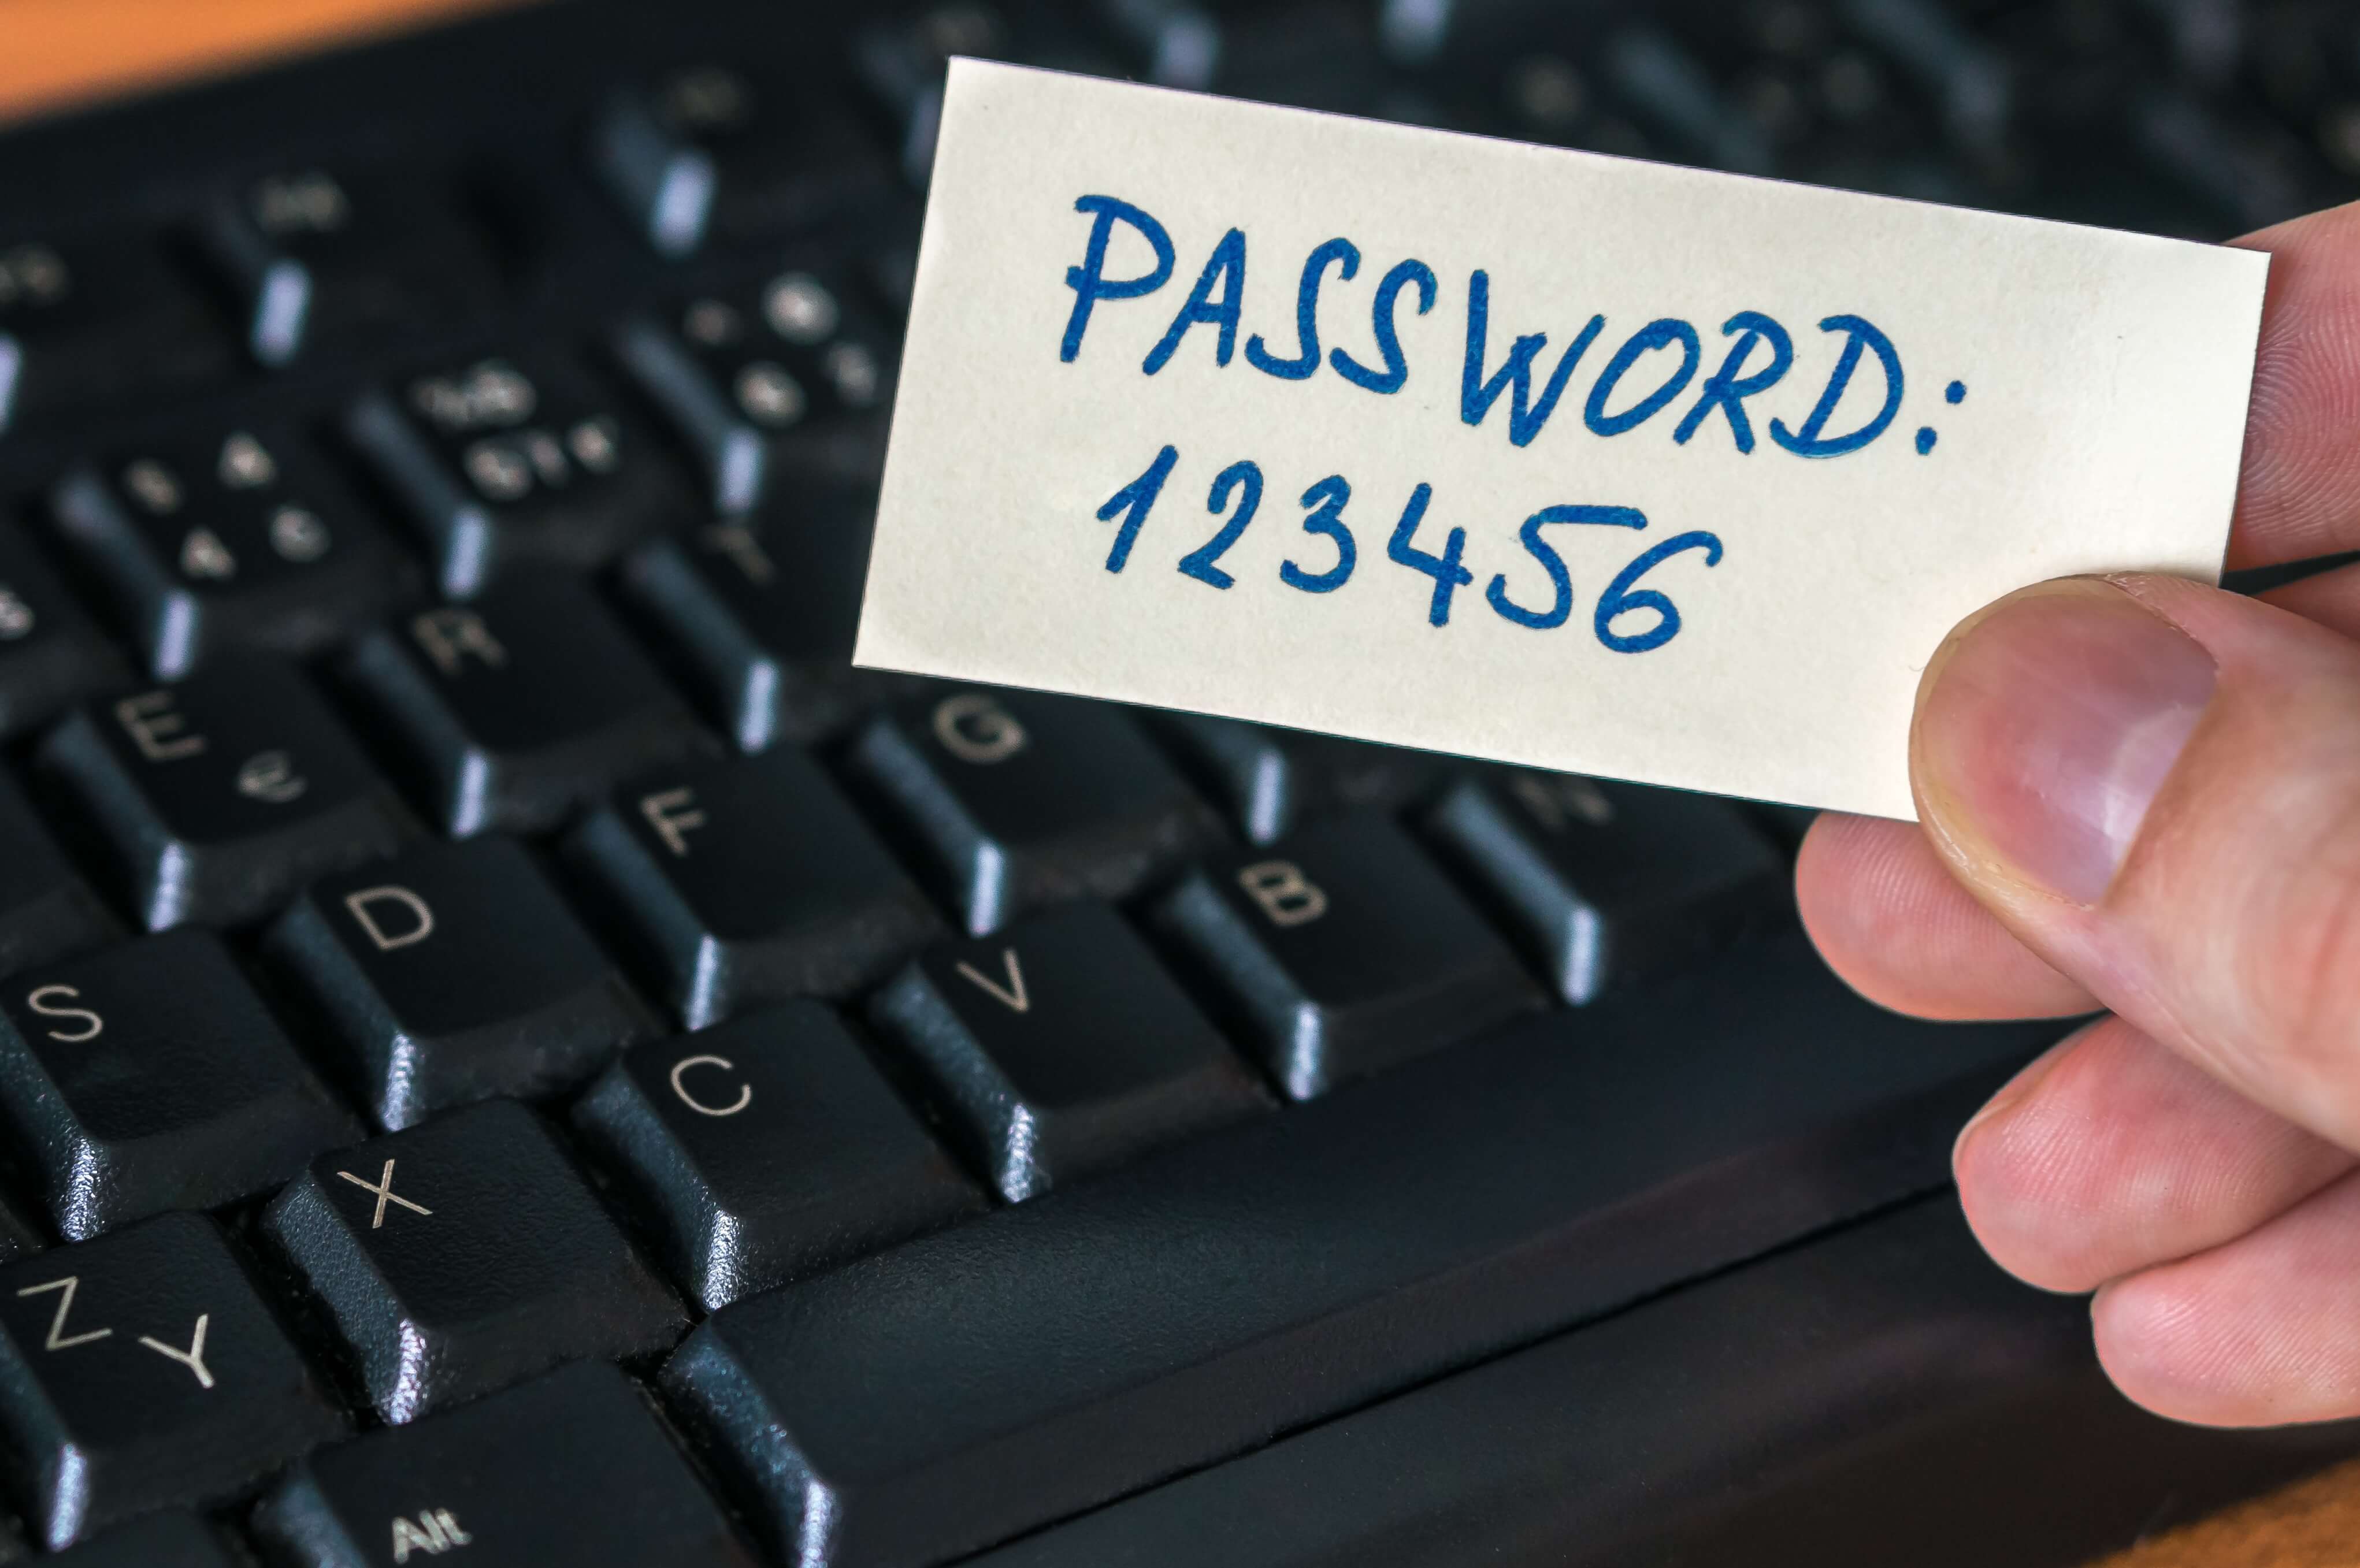 The Art and Science of Passwords